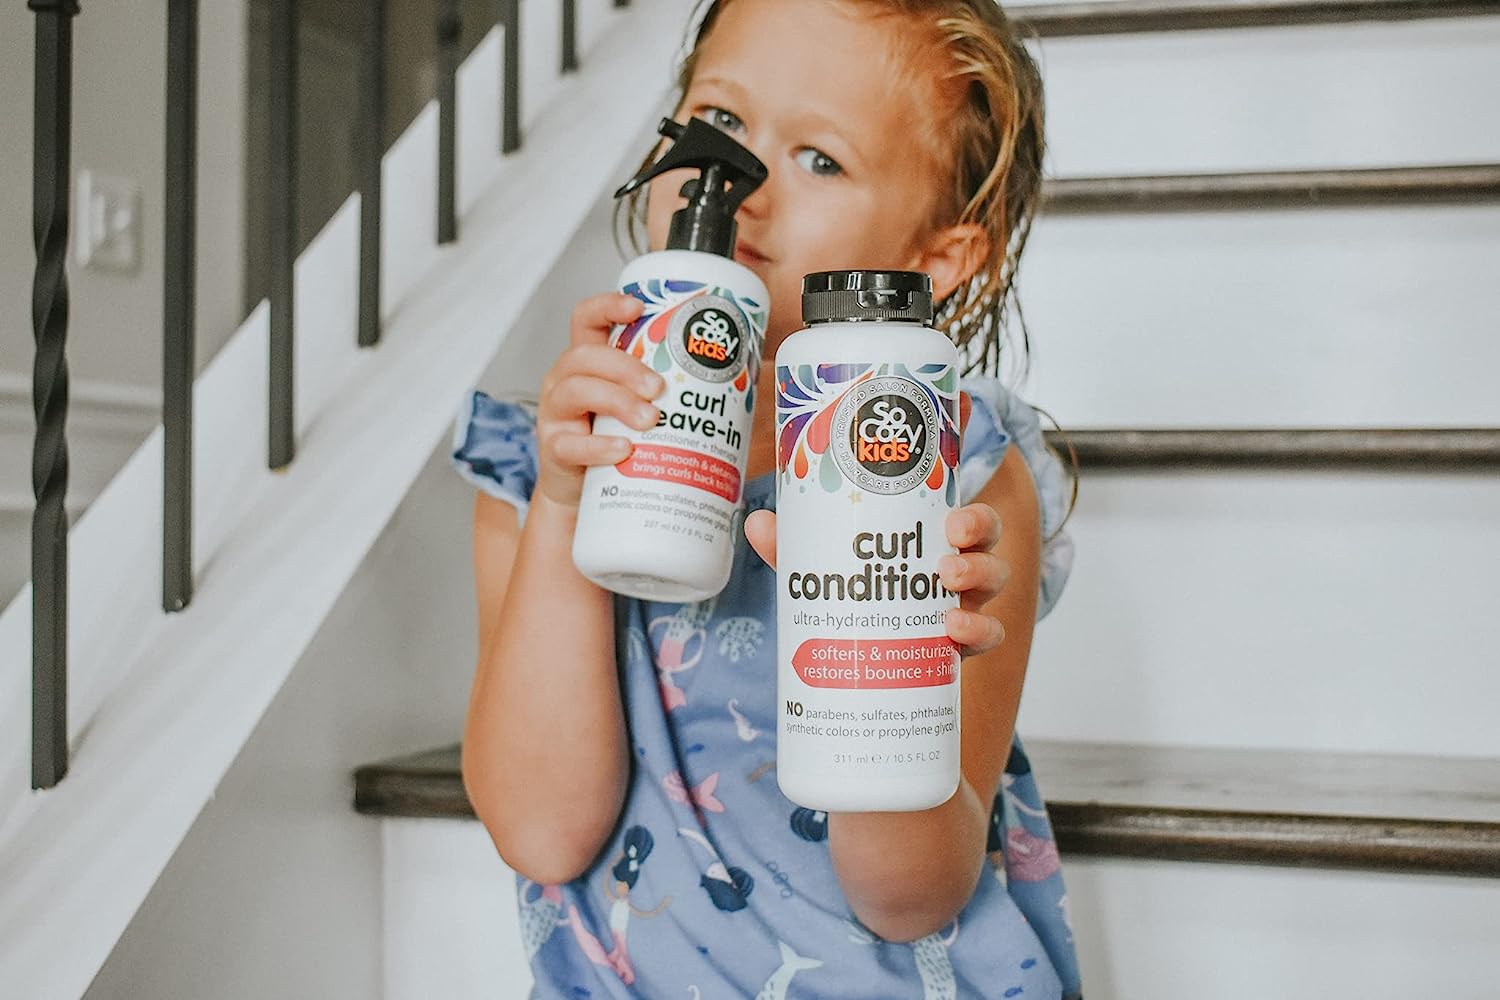 SoCozy Curl Conditioner | For Kids Hair | Softens, Restores Bounce and Shine | No Parabens, Sulfates, Synthetic Colors or Dyes, Sweet-Crème, 10.5 Fl Oz